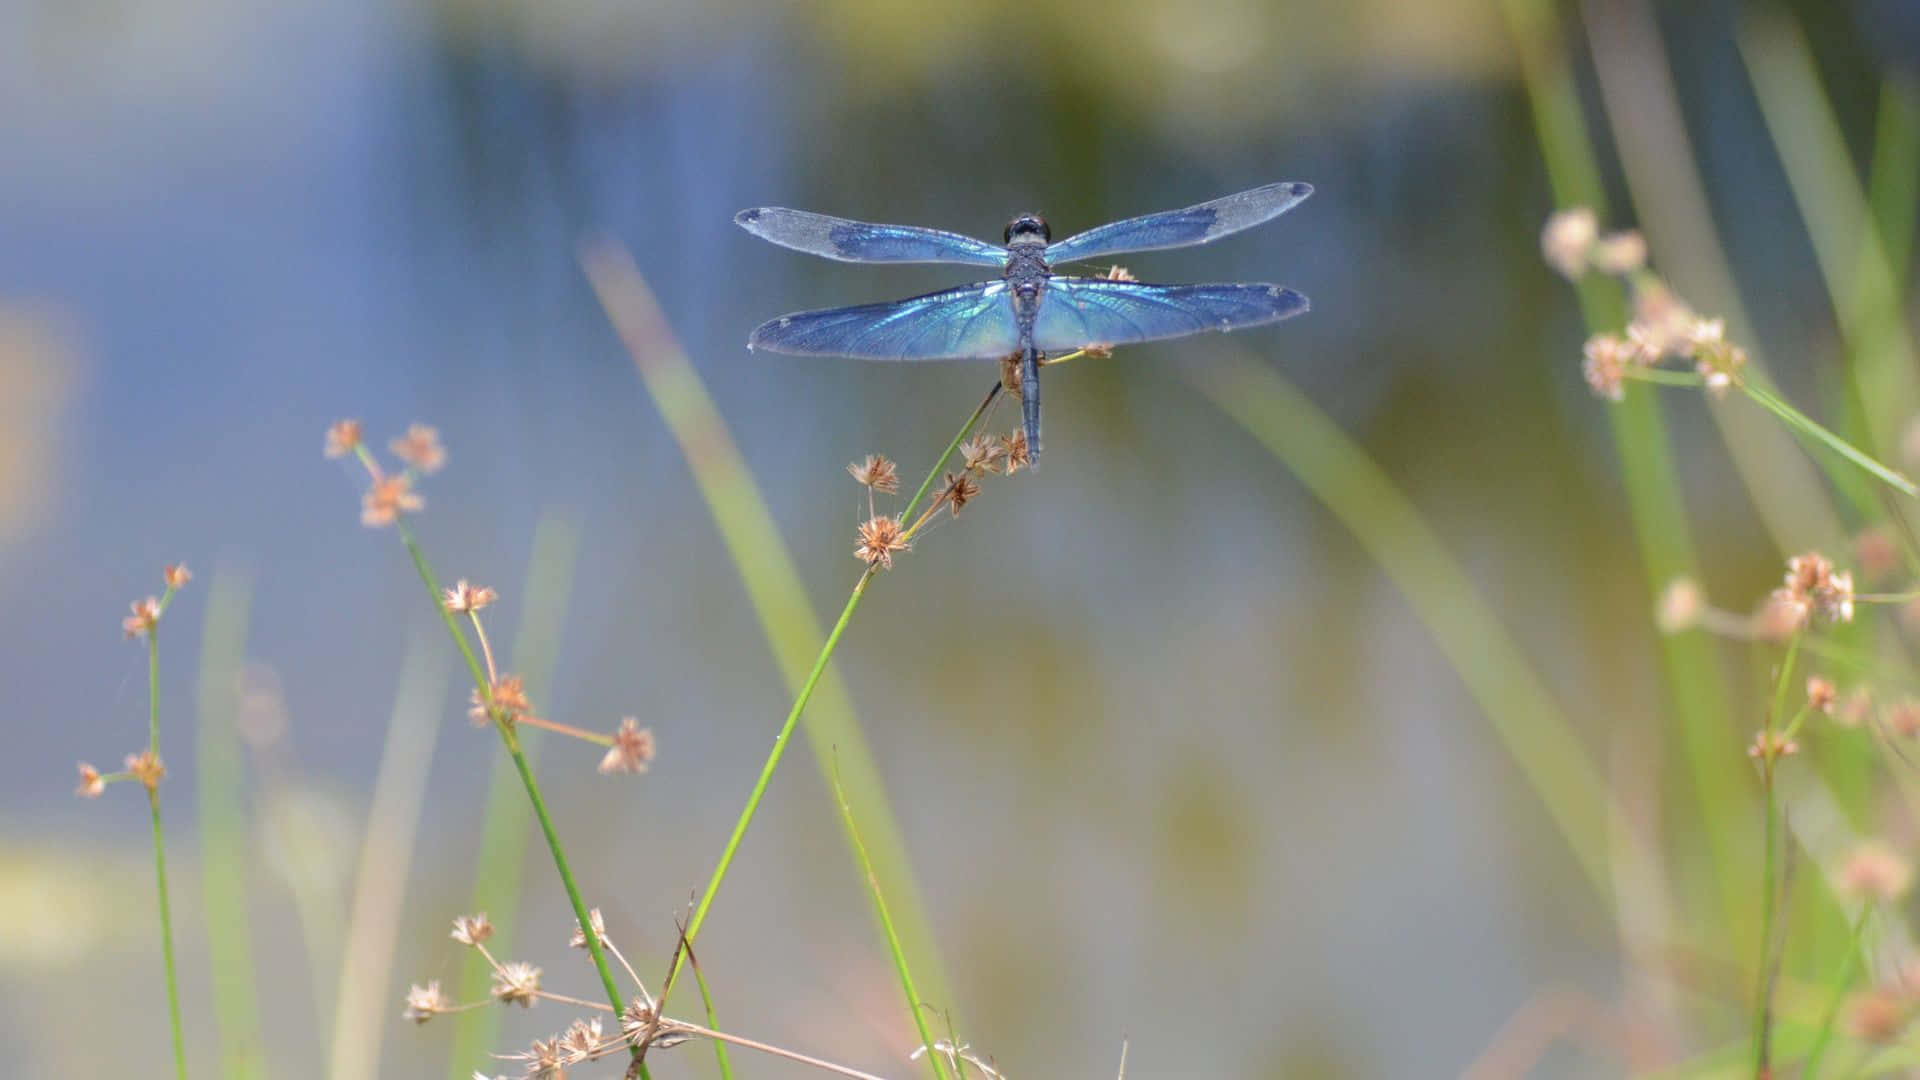 A dragonfly rests in a bed of luscious summer grass.